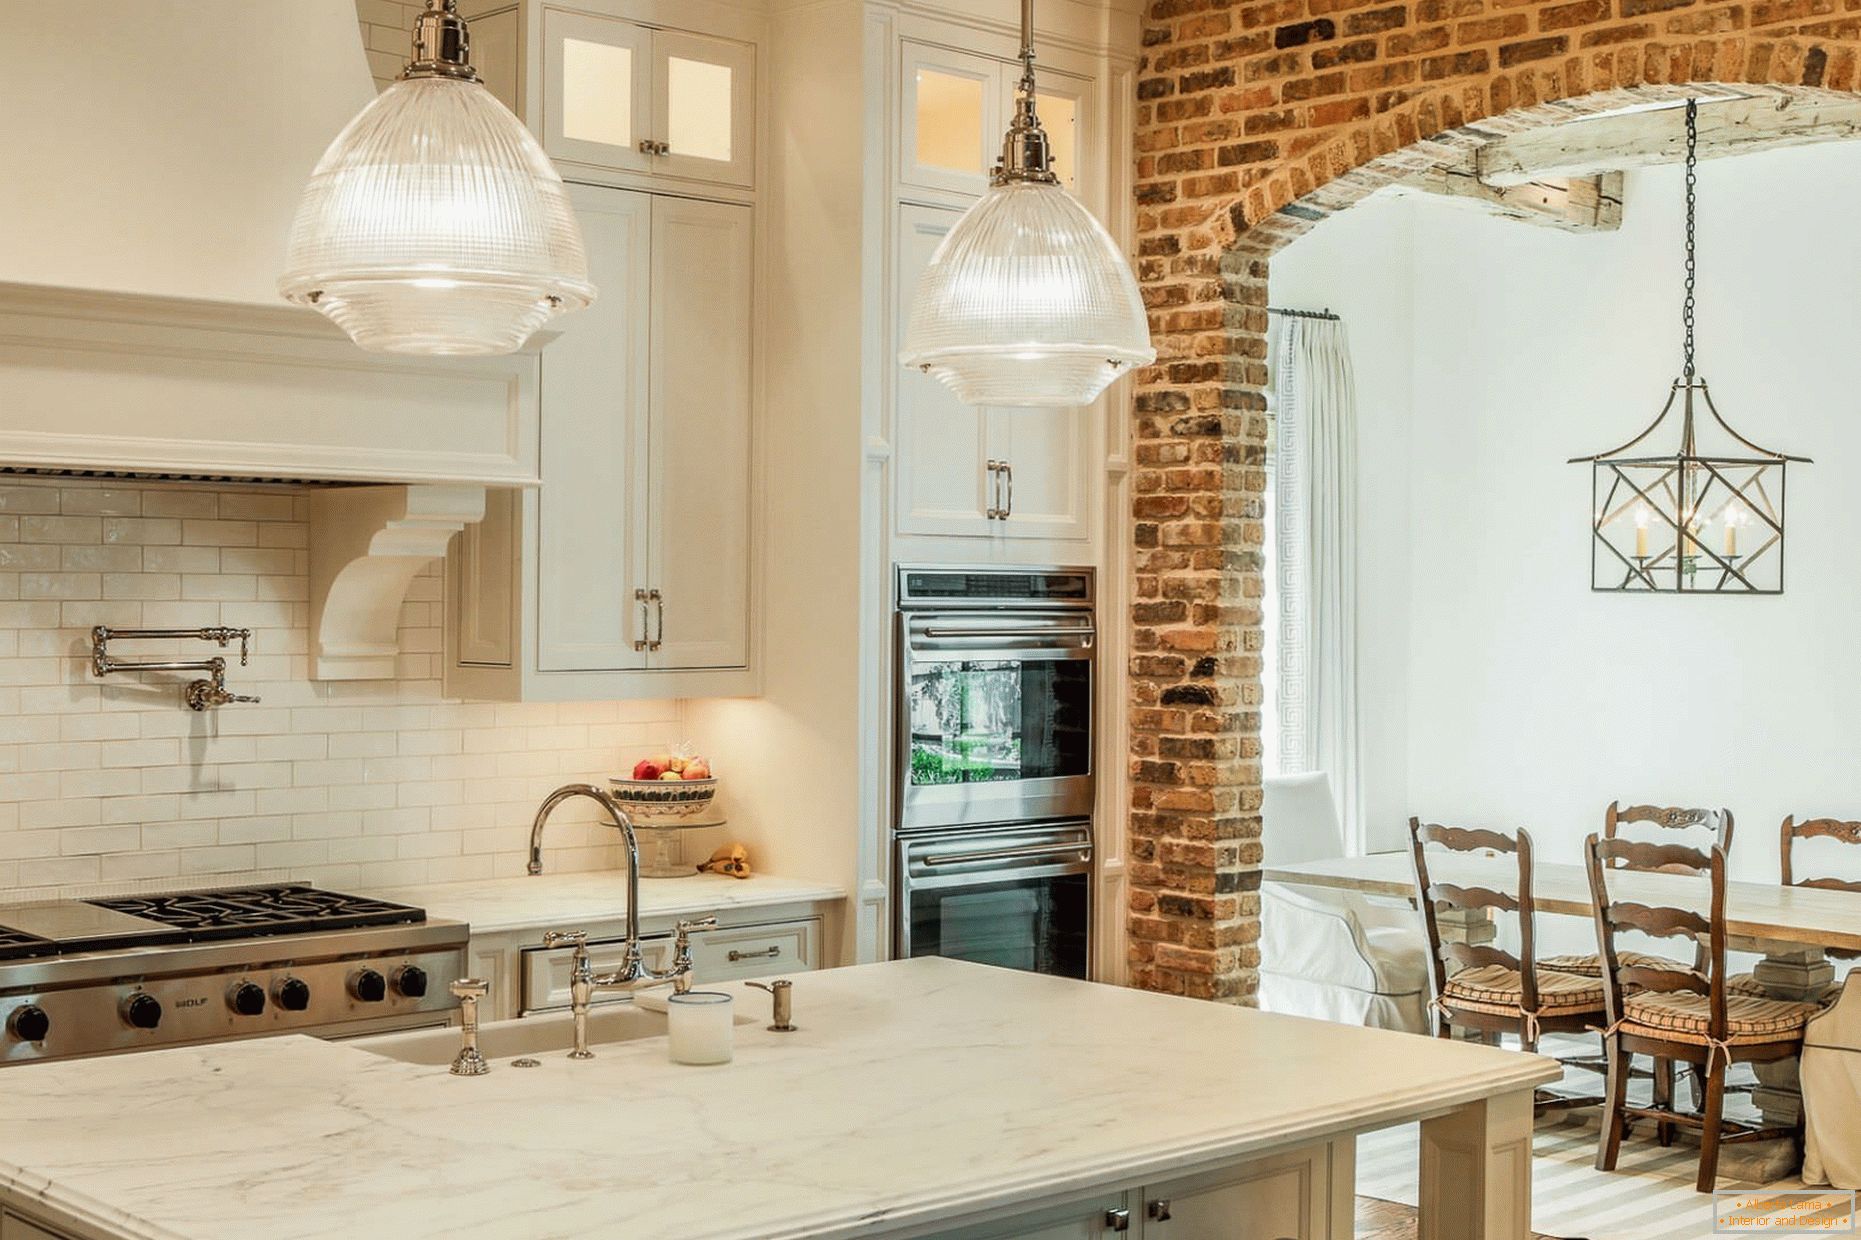 Beautiful stone arch in the kitchen